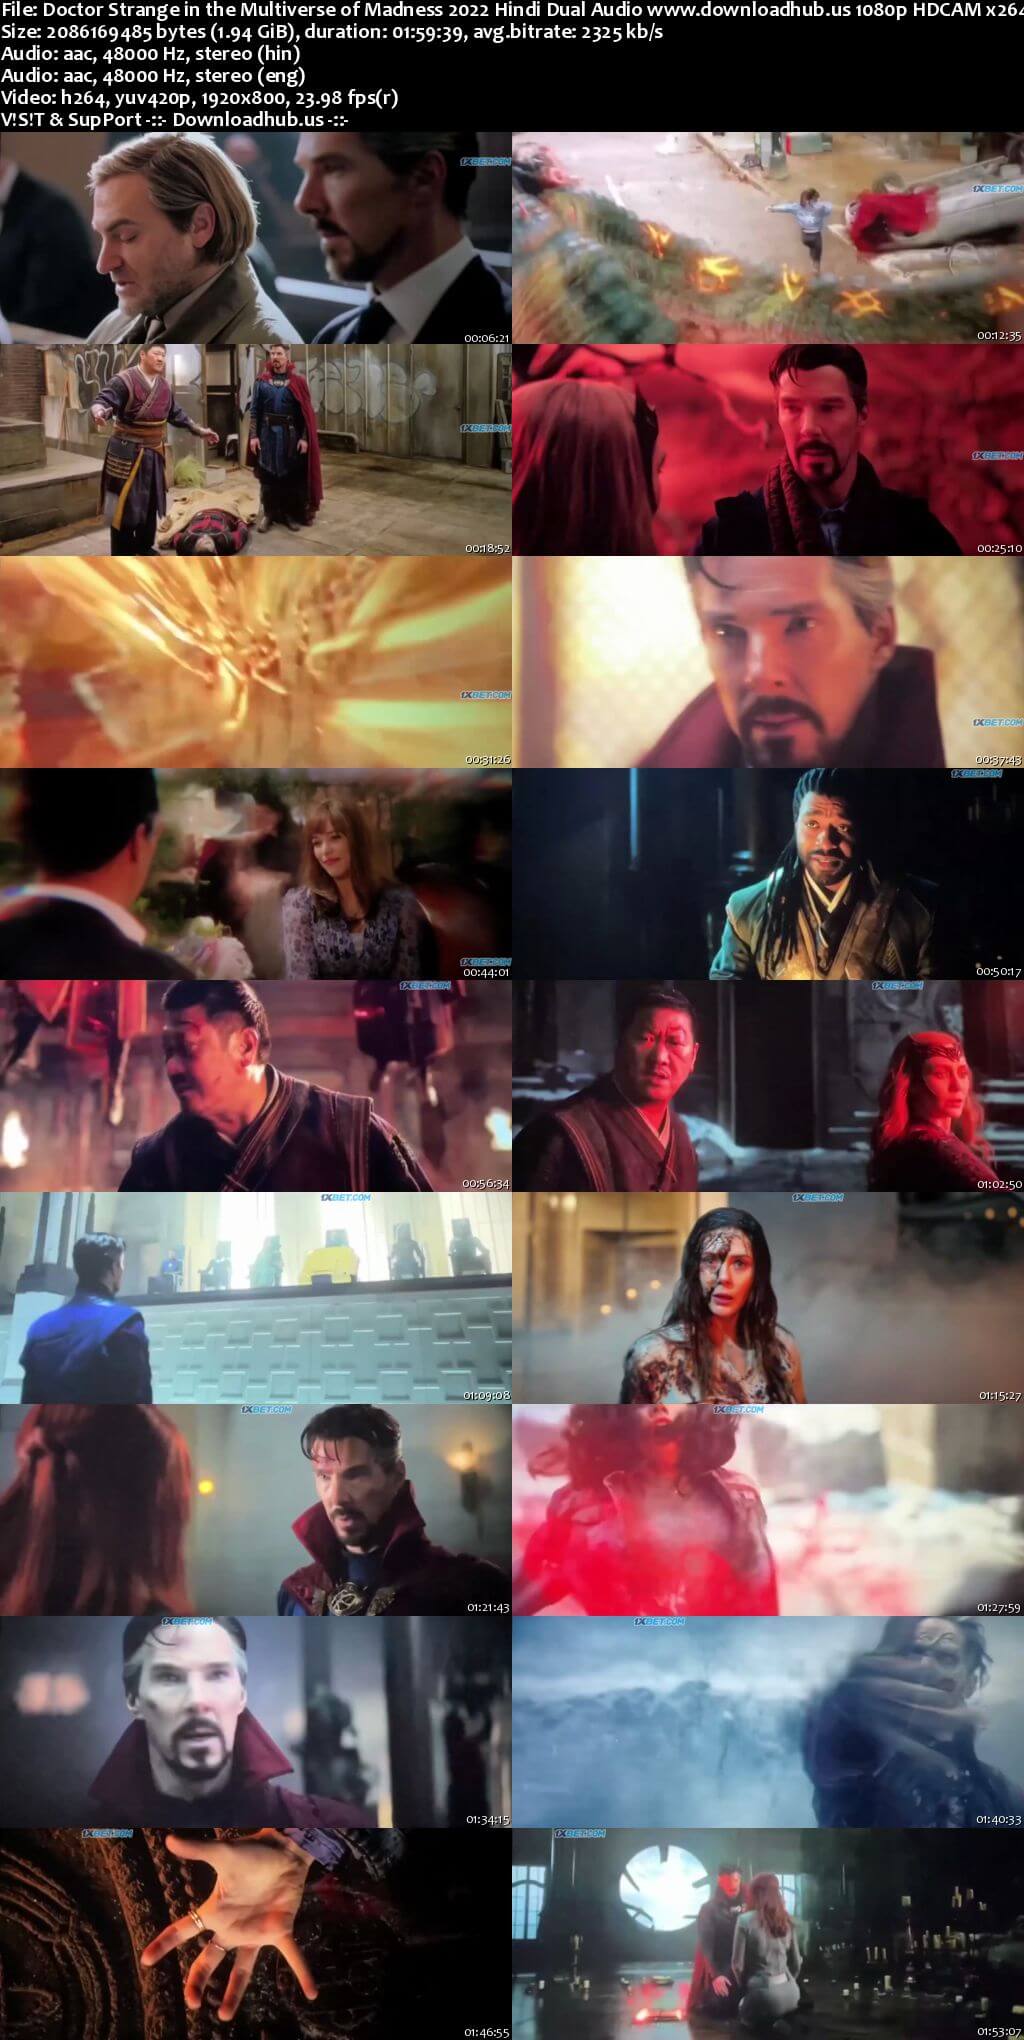 Doctor Strange in the Multiverse of Madness 2022 Hindi Dual Audio 1080p 720p 480p HDCAM x264